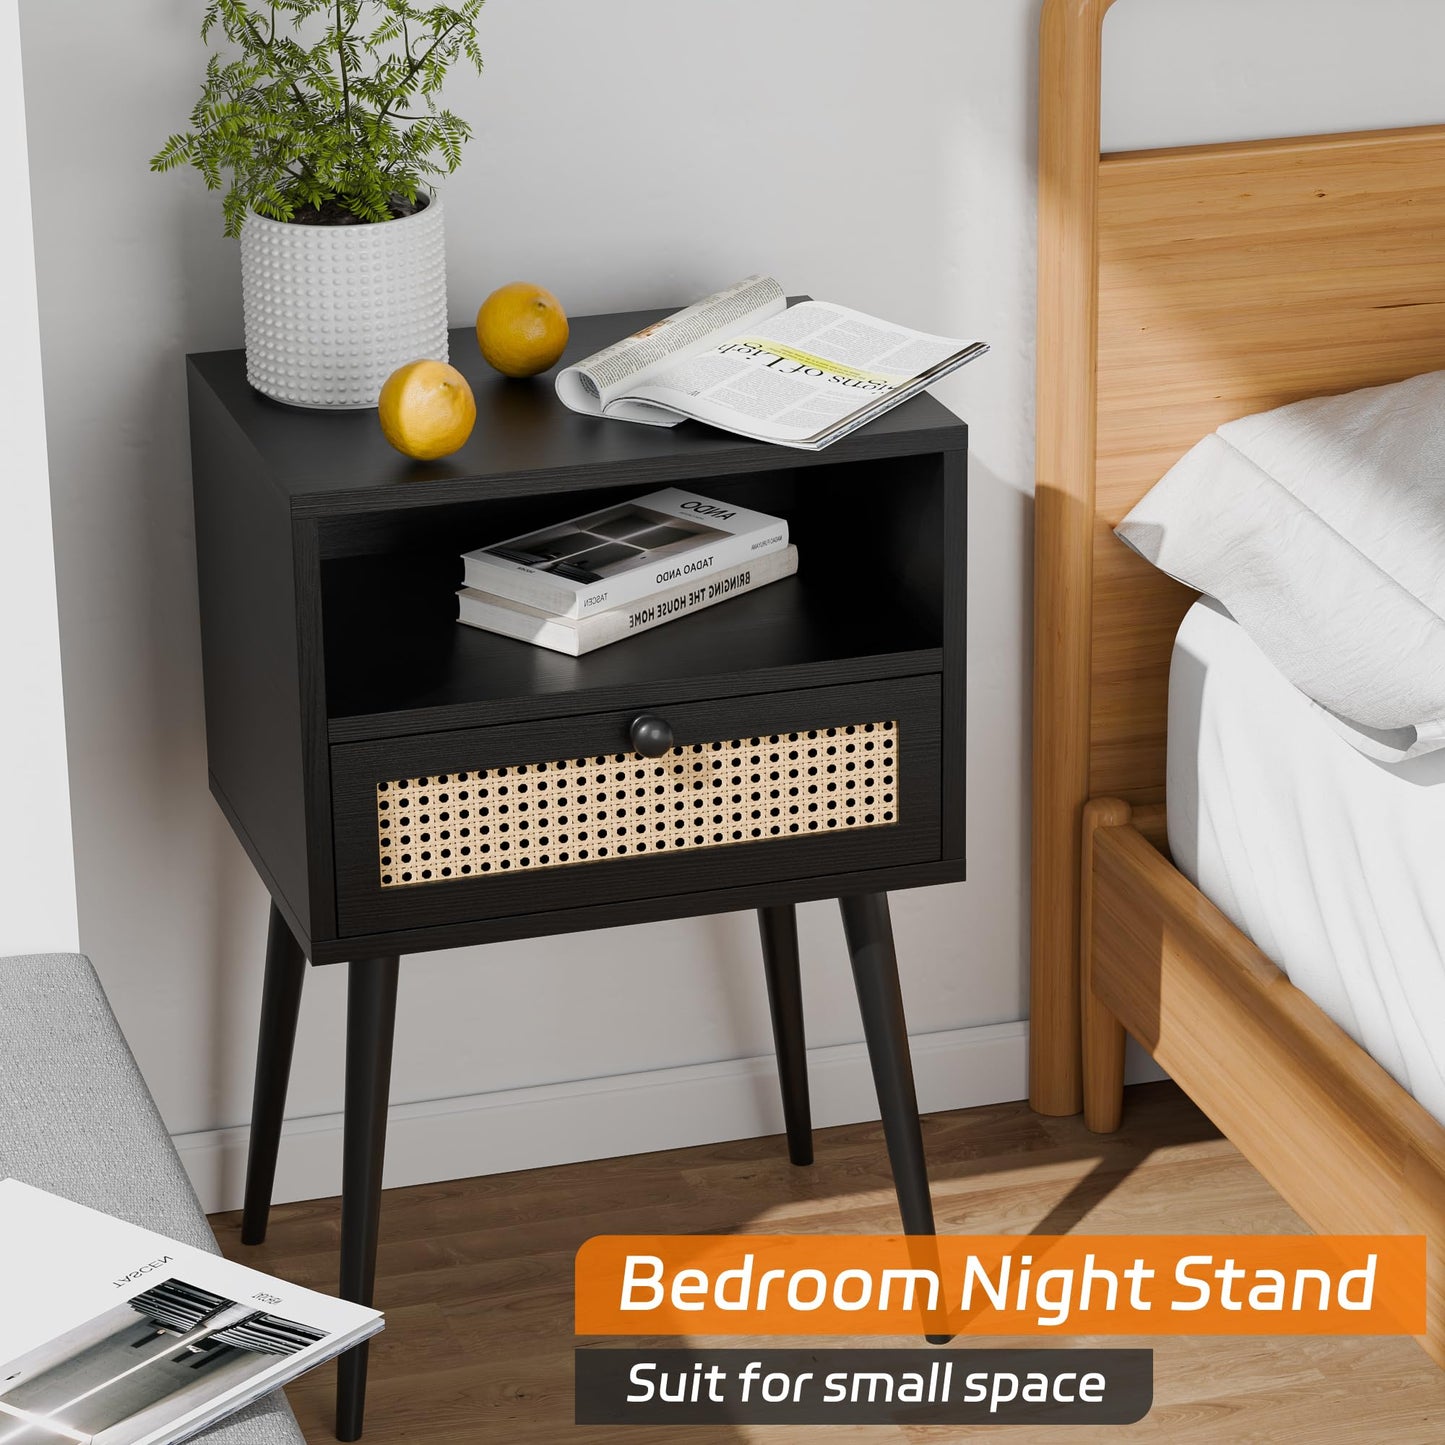 Black Nightstand Bedside Table Small Nightstand with Drawers Rattan Side Table Living Room End Tables Bedroom Wood Mid Century Modern Nightstands